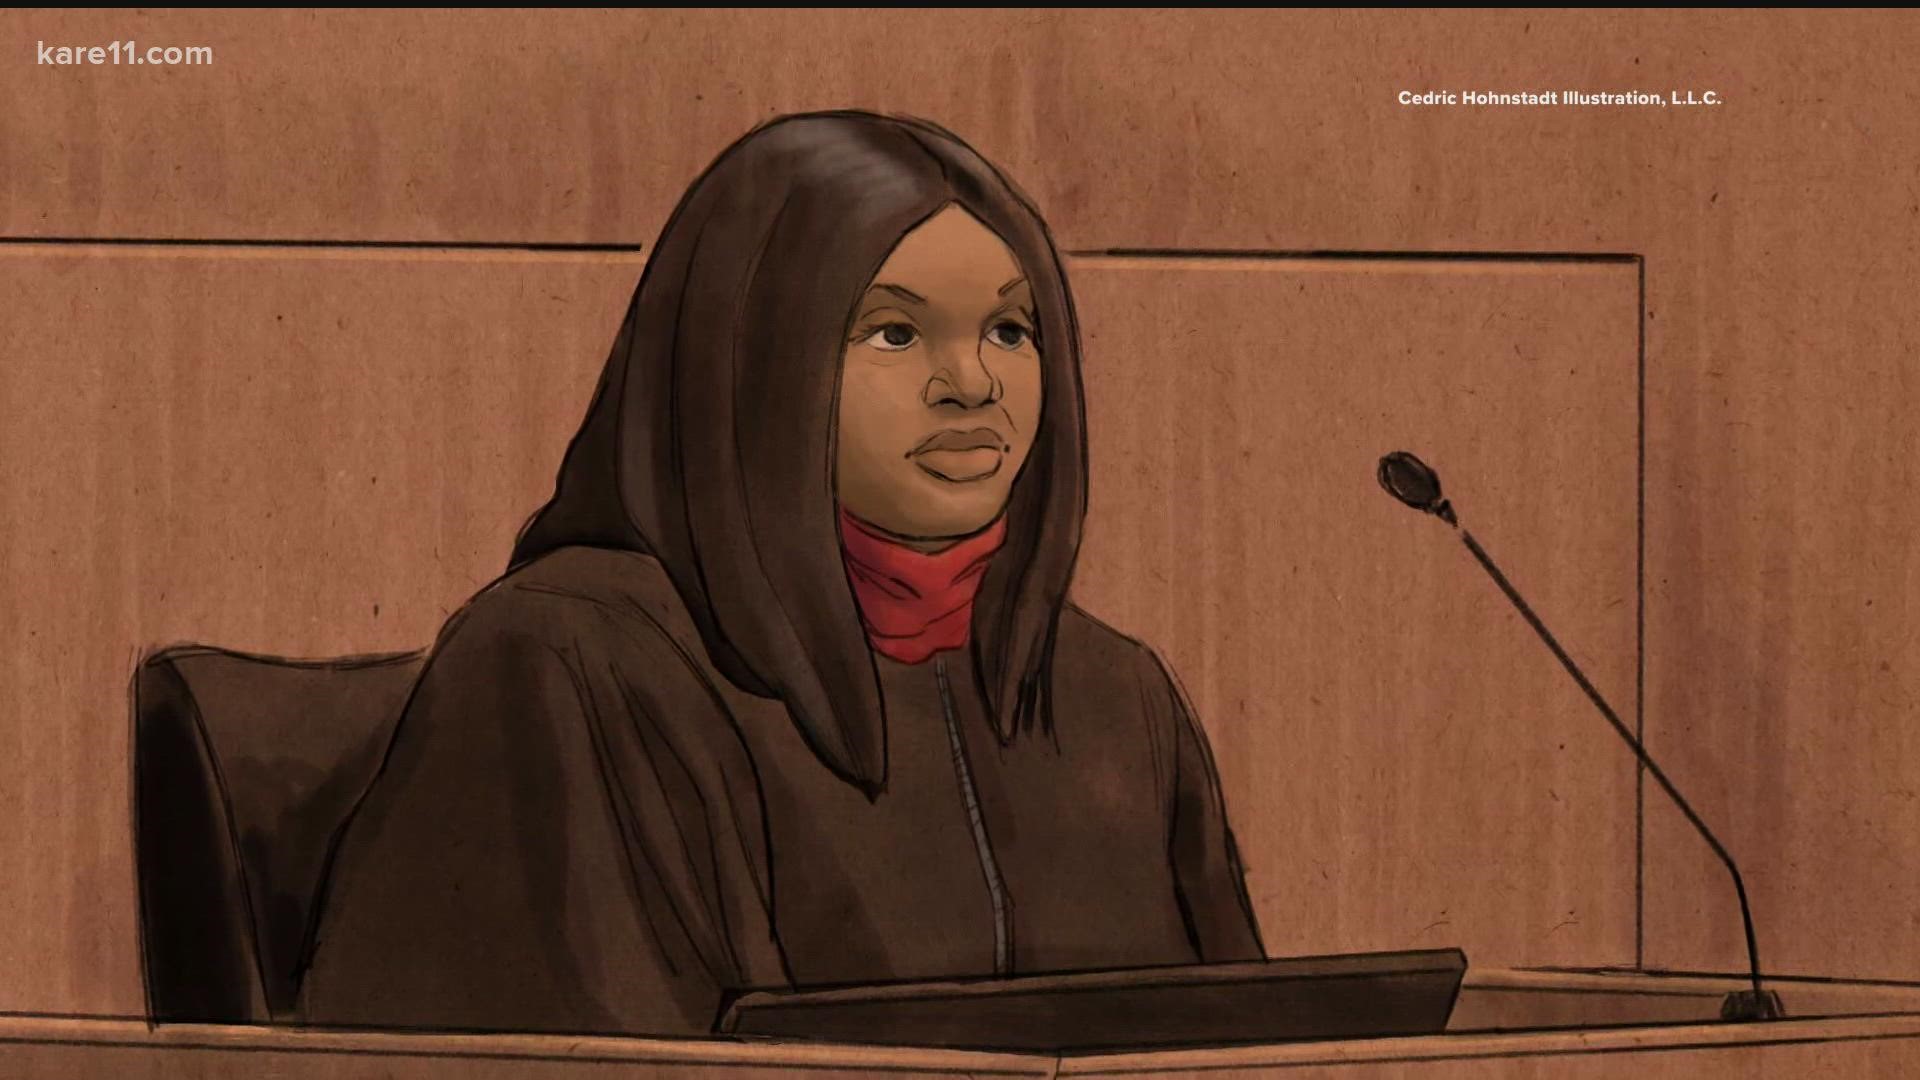 Darnella Frazier, the teenage bystander who filmed George Floyd's murder, briefly left the witness stand in tears at the start of her testimony.